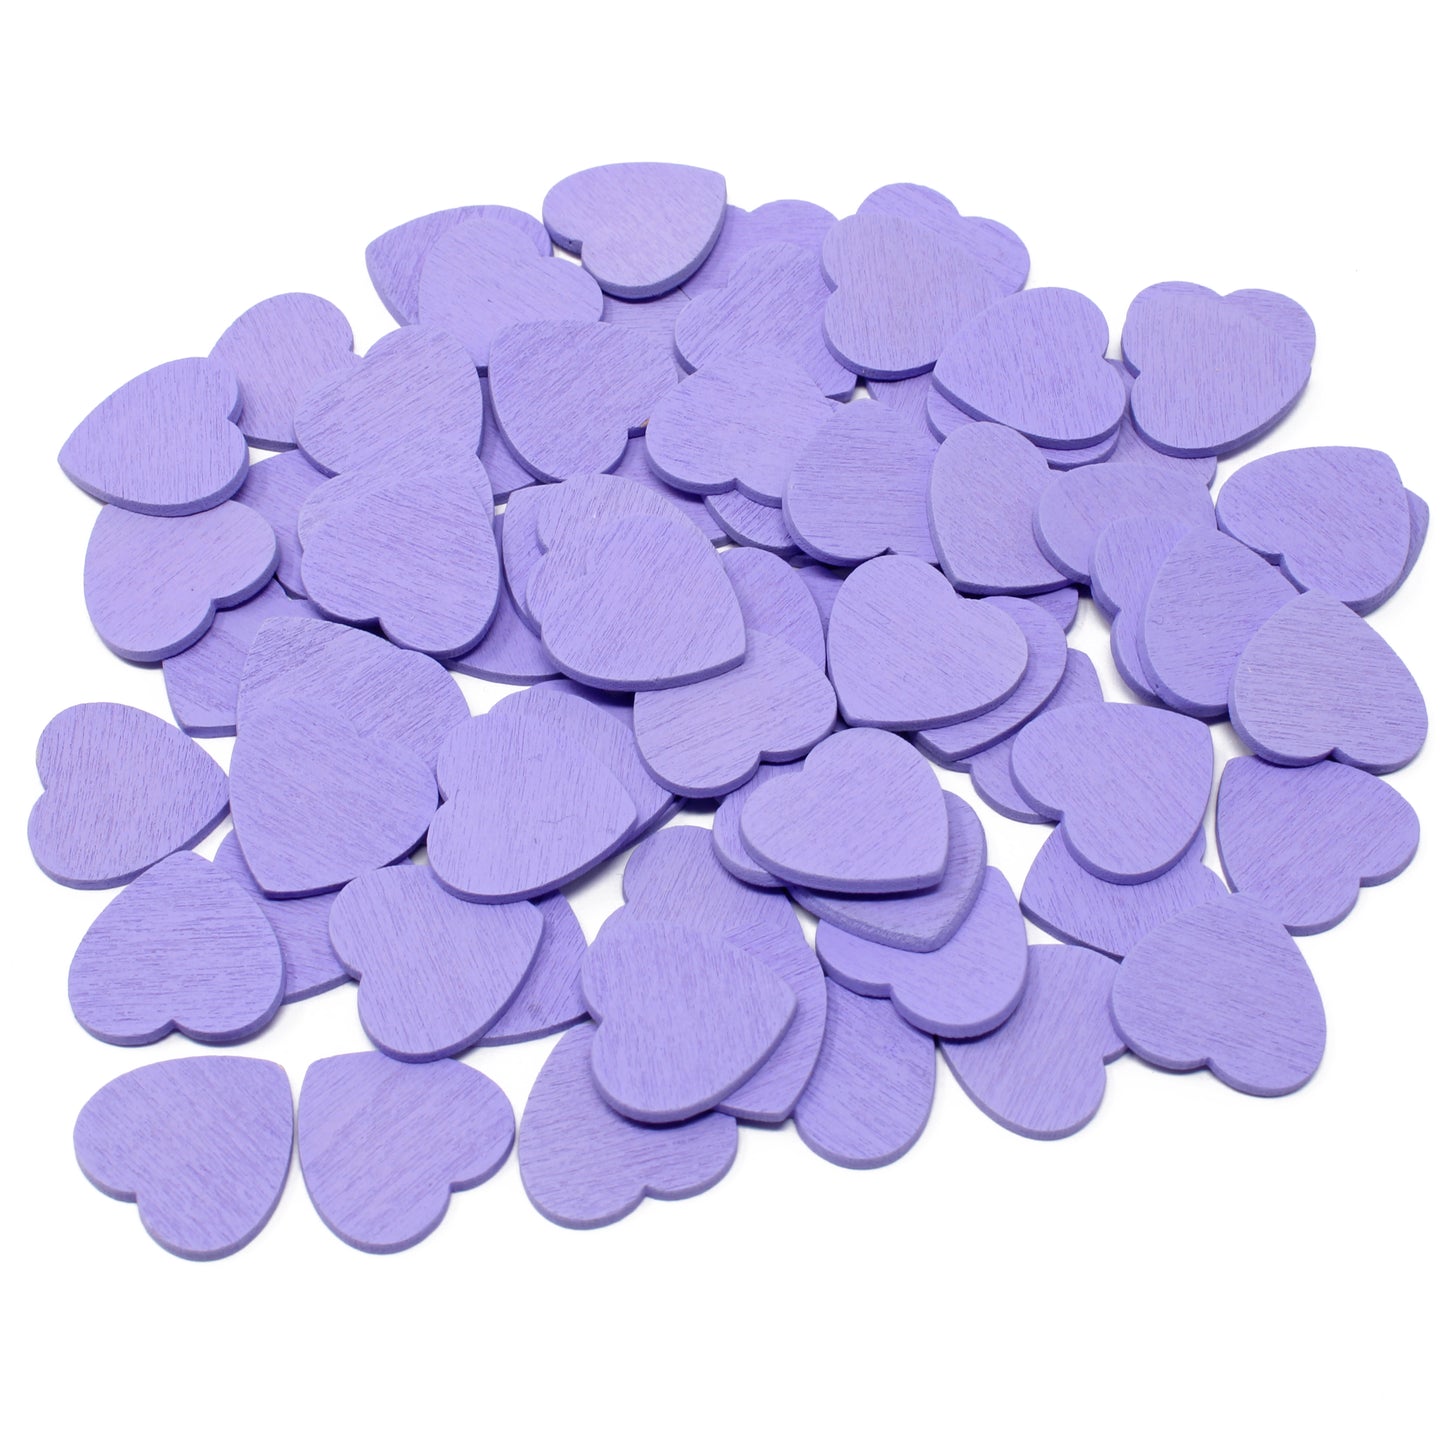 Lilc 18mm Wooden Craft Coloured Hearts